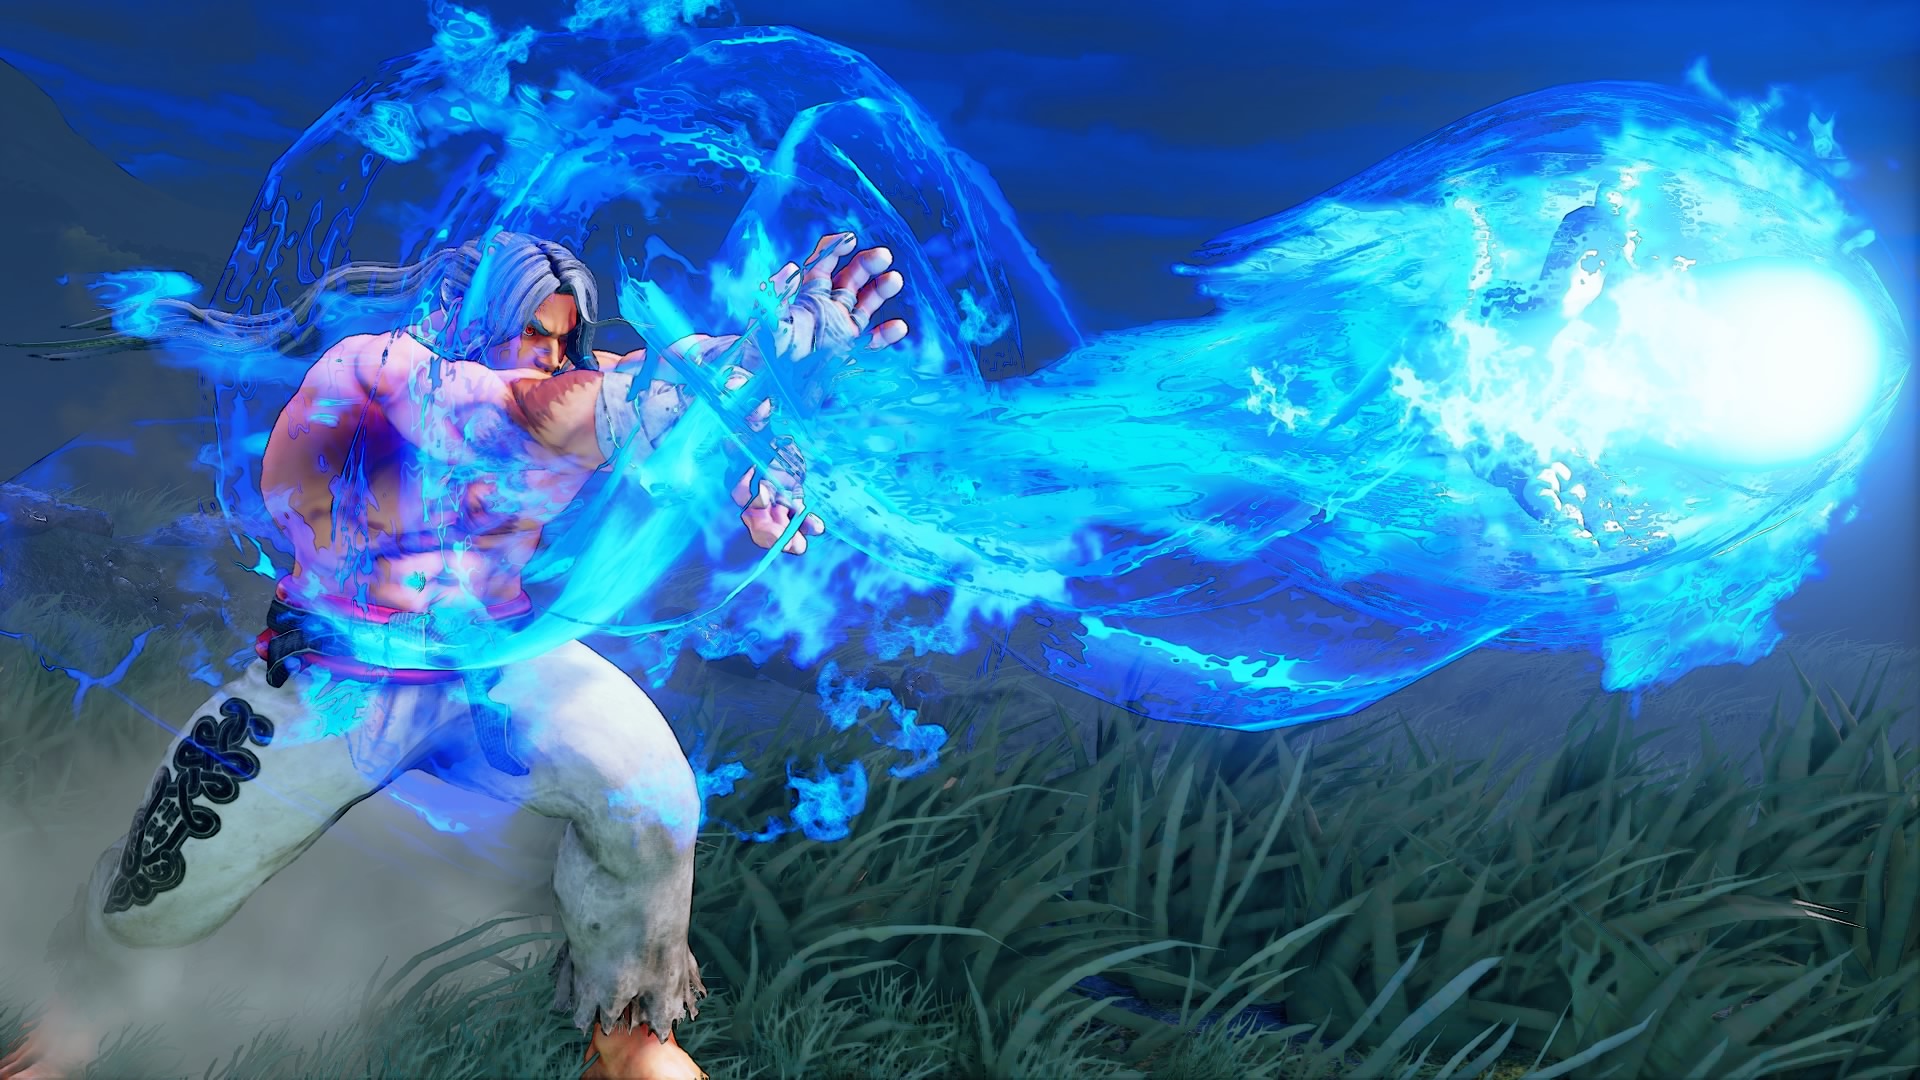 Street Fighter V Ryu Outfit Makes Him Look Like Fighting EX Layer's Kairi